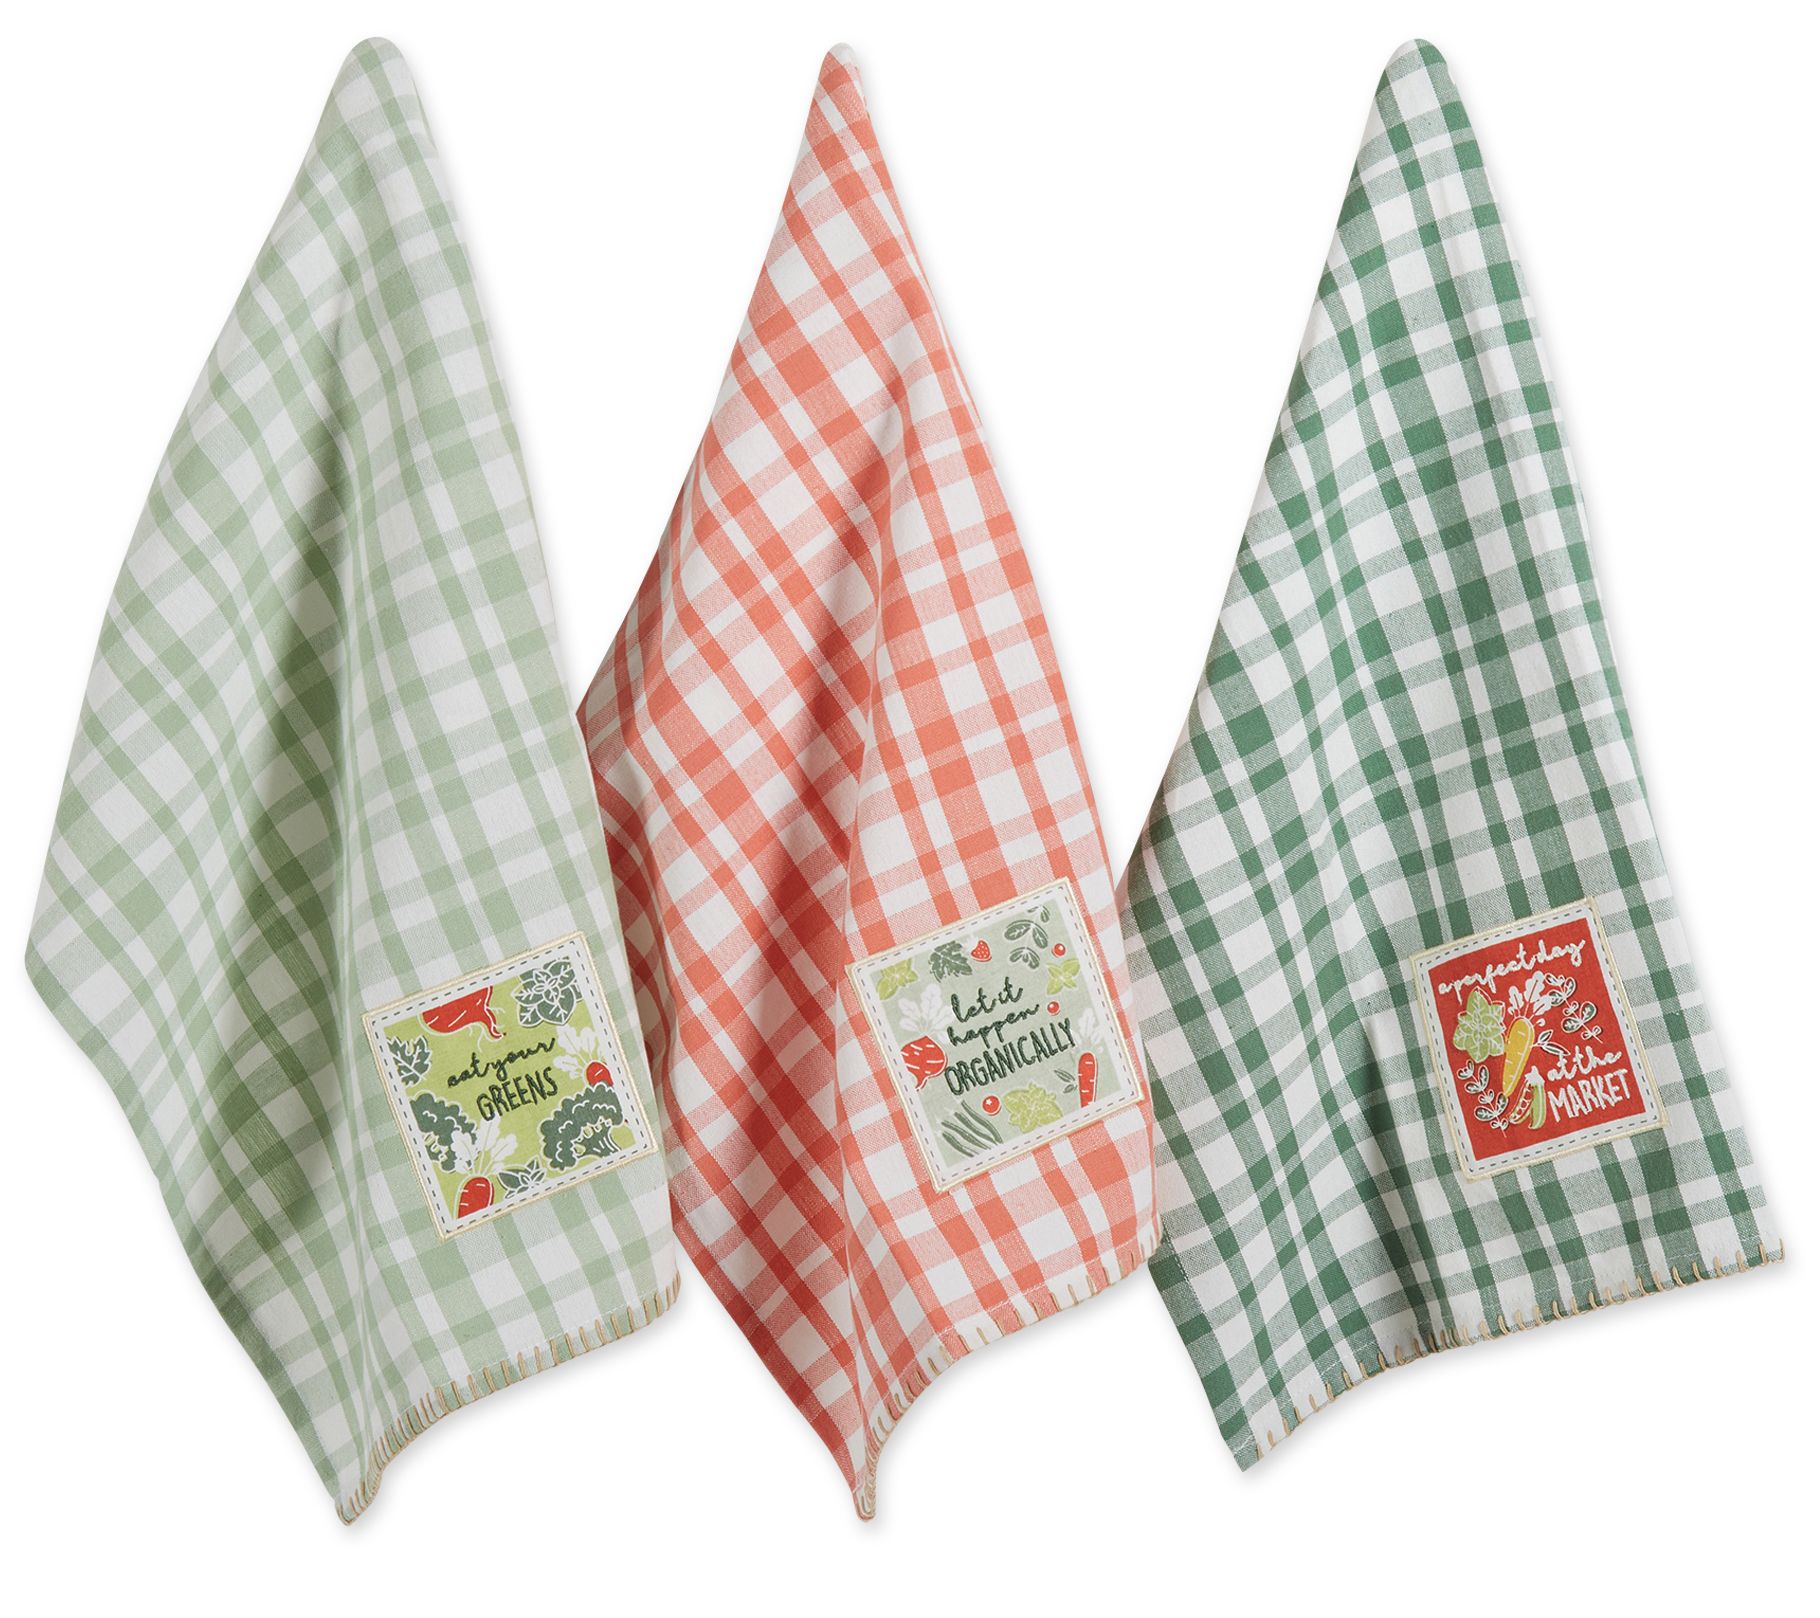 5PC Kitchen Towels Sets - Housewarming Gifts New Home, Hostess Gifts,  Christmas Kitchen Gifts for Women - Cute Decorative Dish Towels, Hand Towels,  Tea Towels, Flour Sack Towels, Dishcloths 